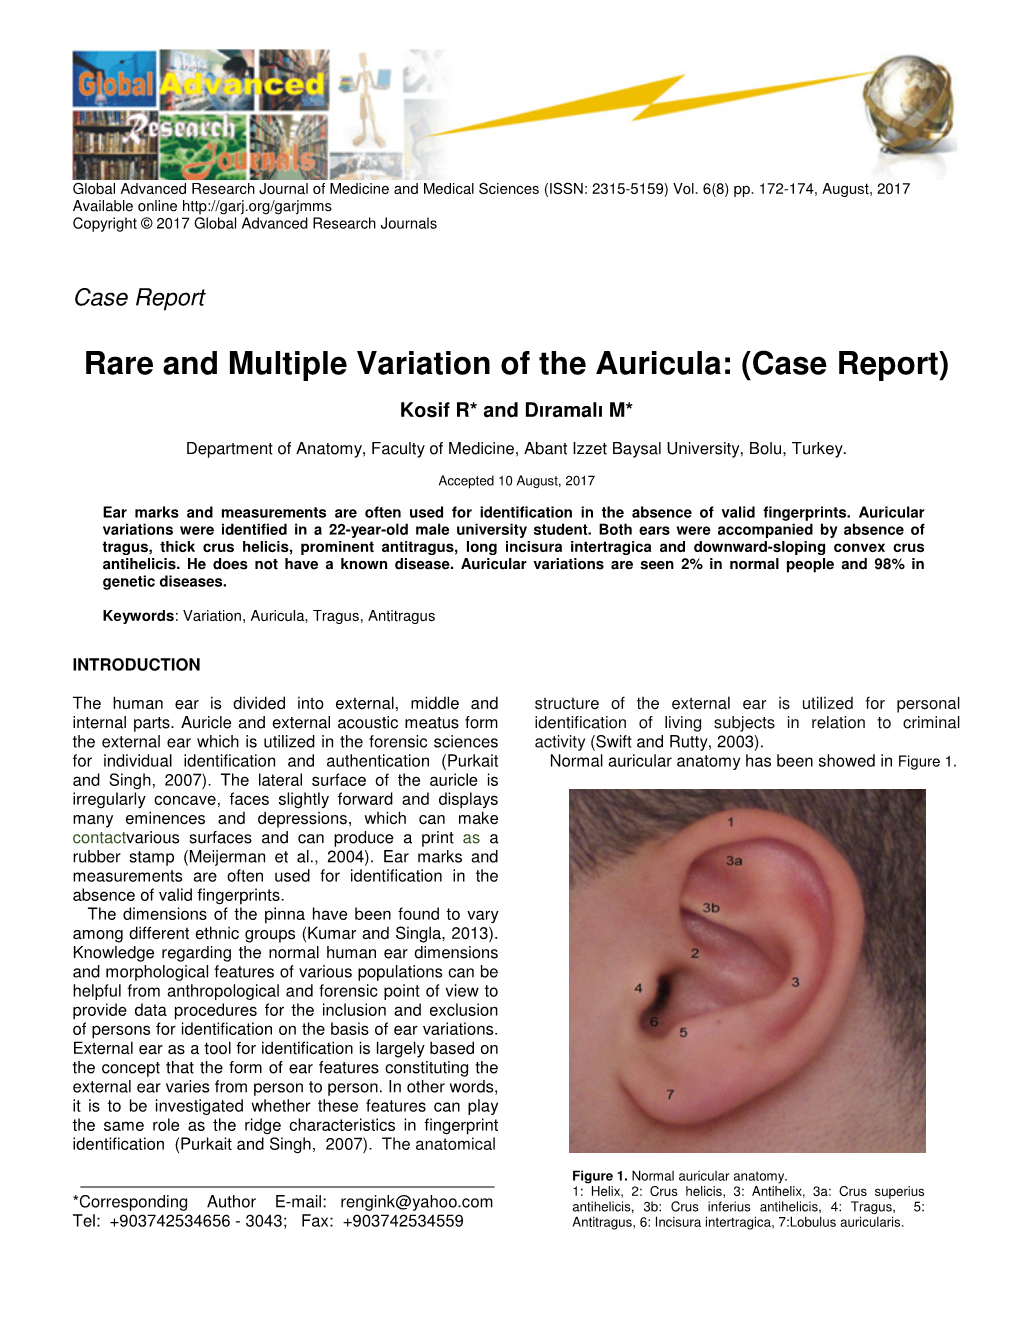 Rare and Multiple Variation of the Auricula: (Case Report)